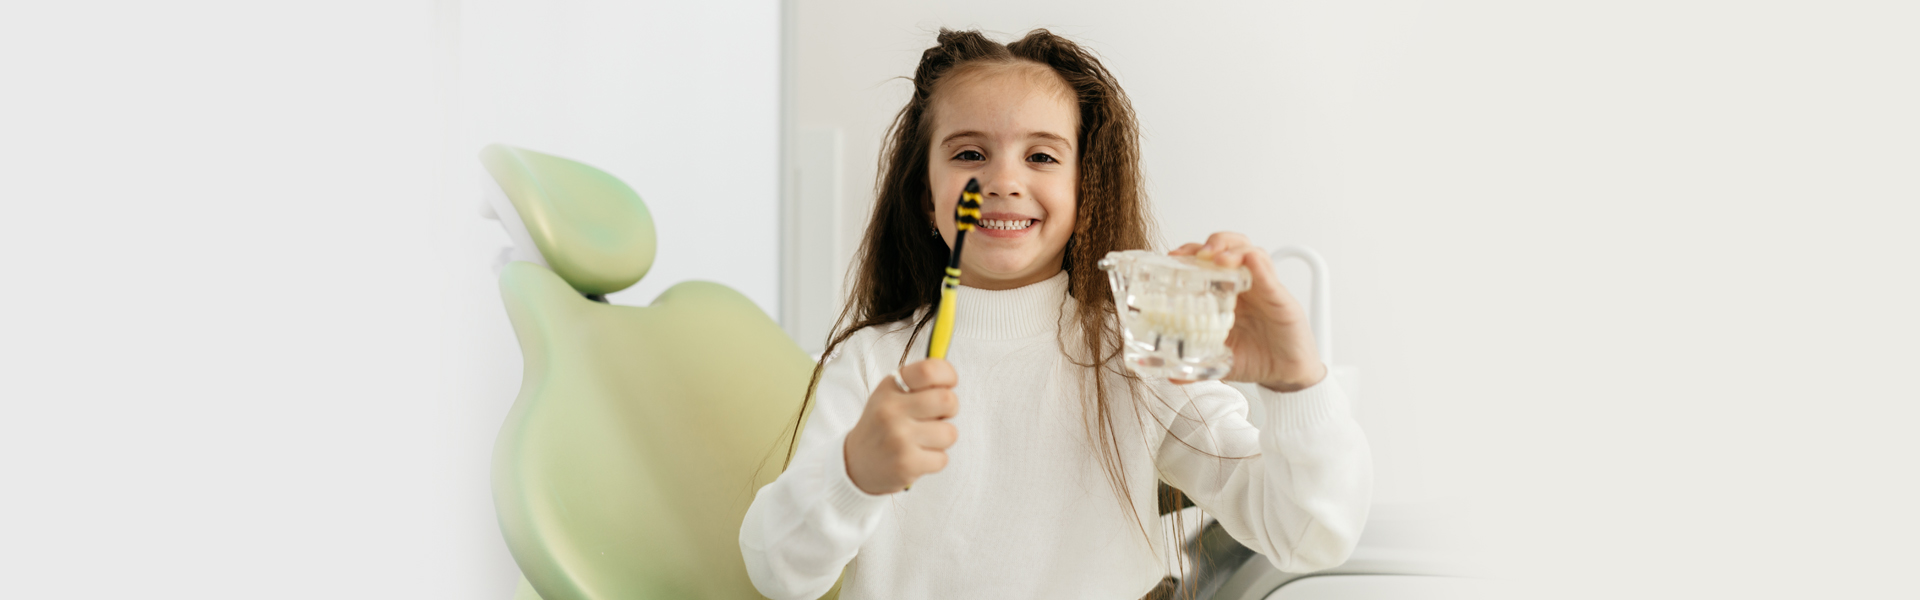 A Guide for Selecting the Ideal Pediatric Dentist for Your Child’s Dental Health